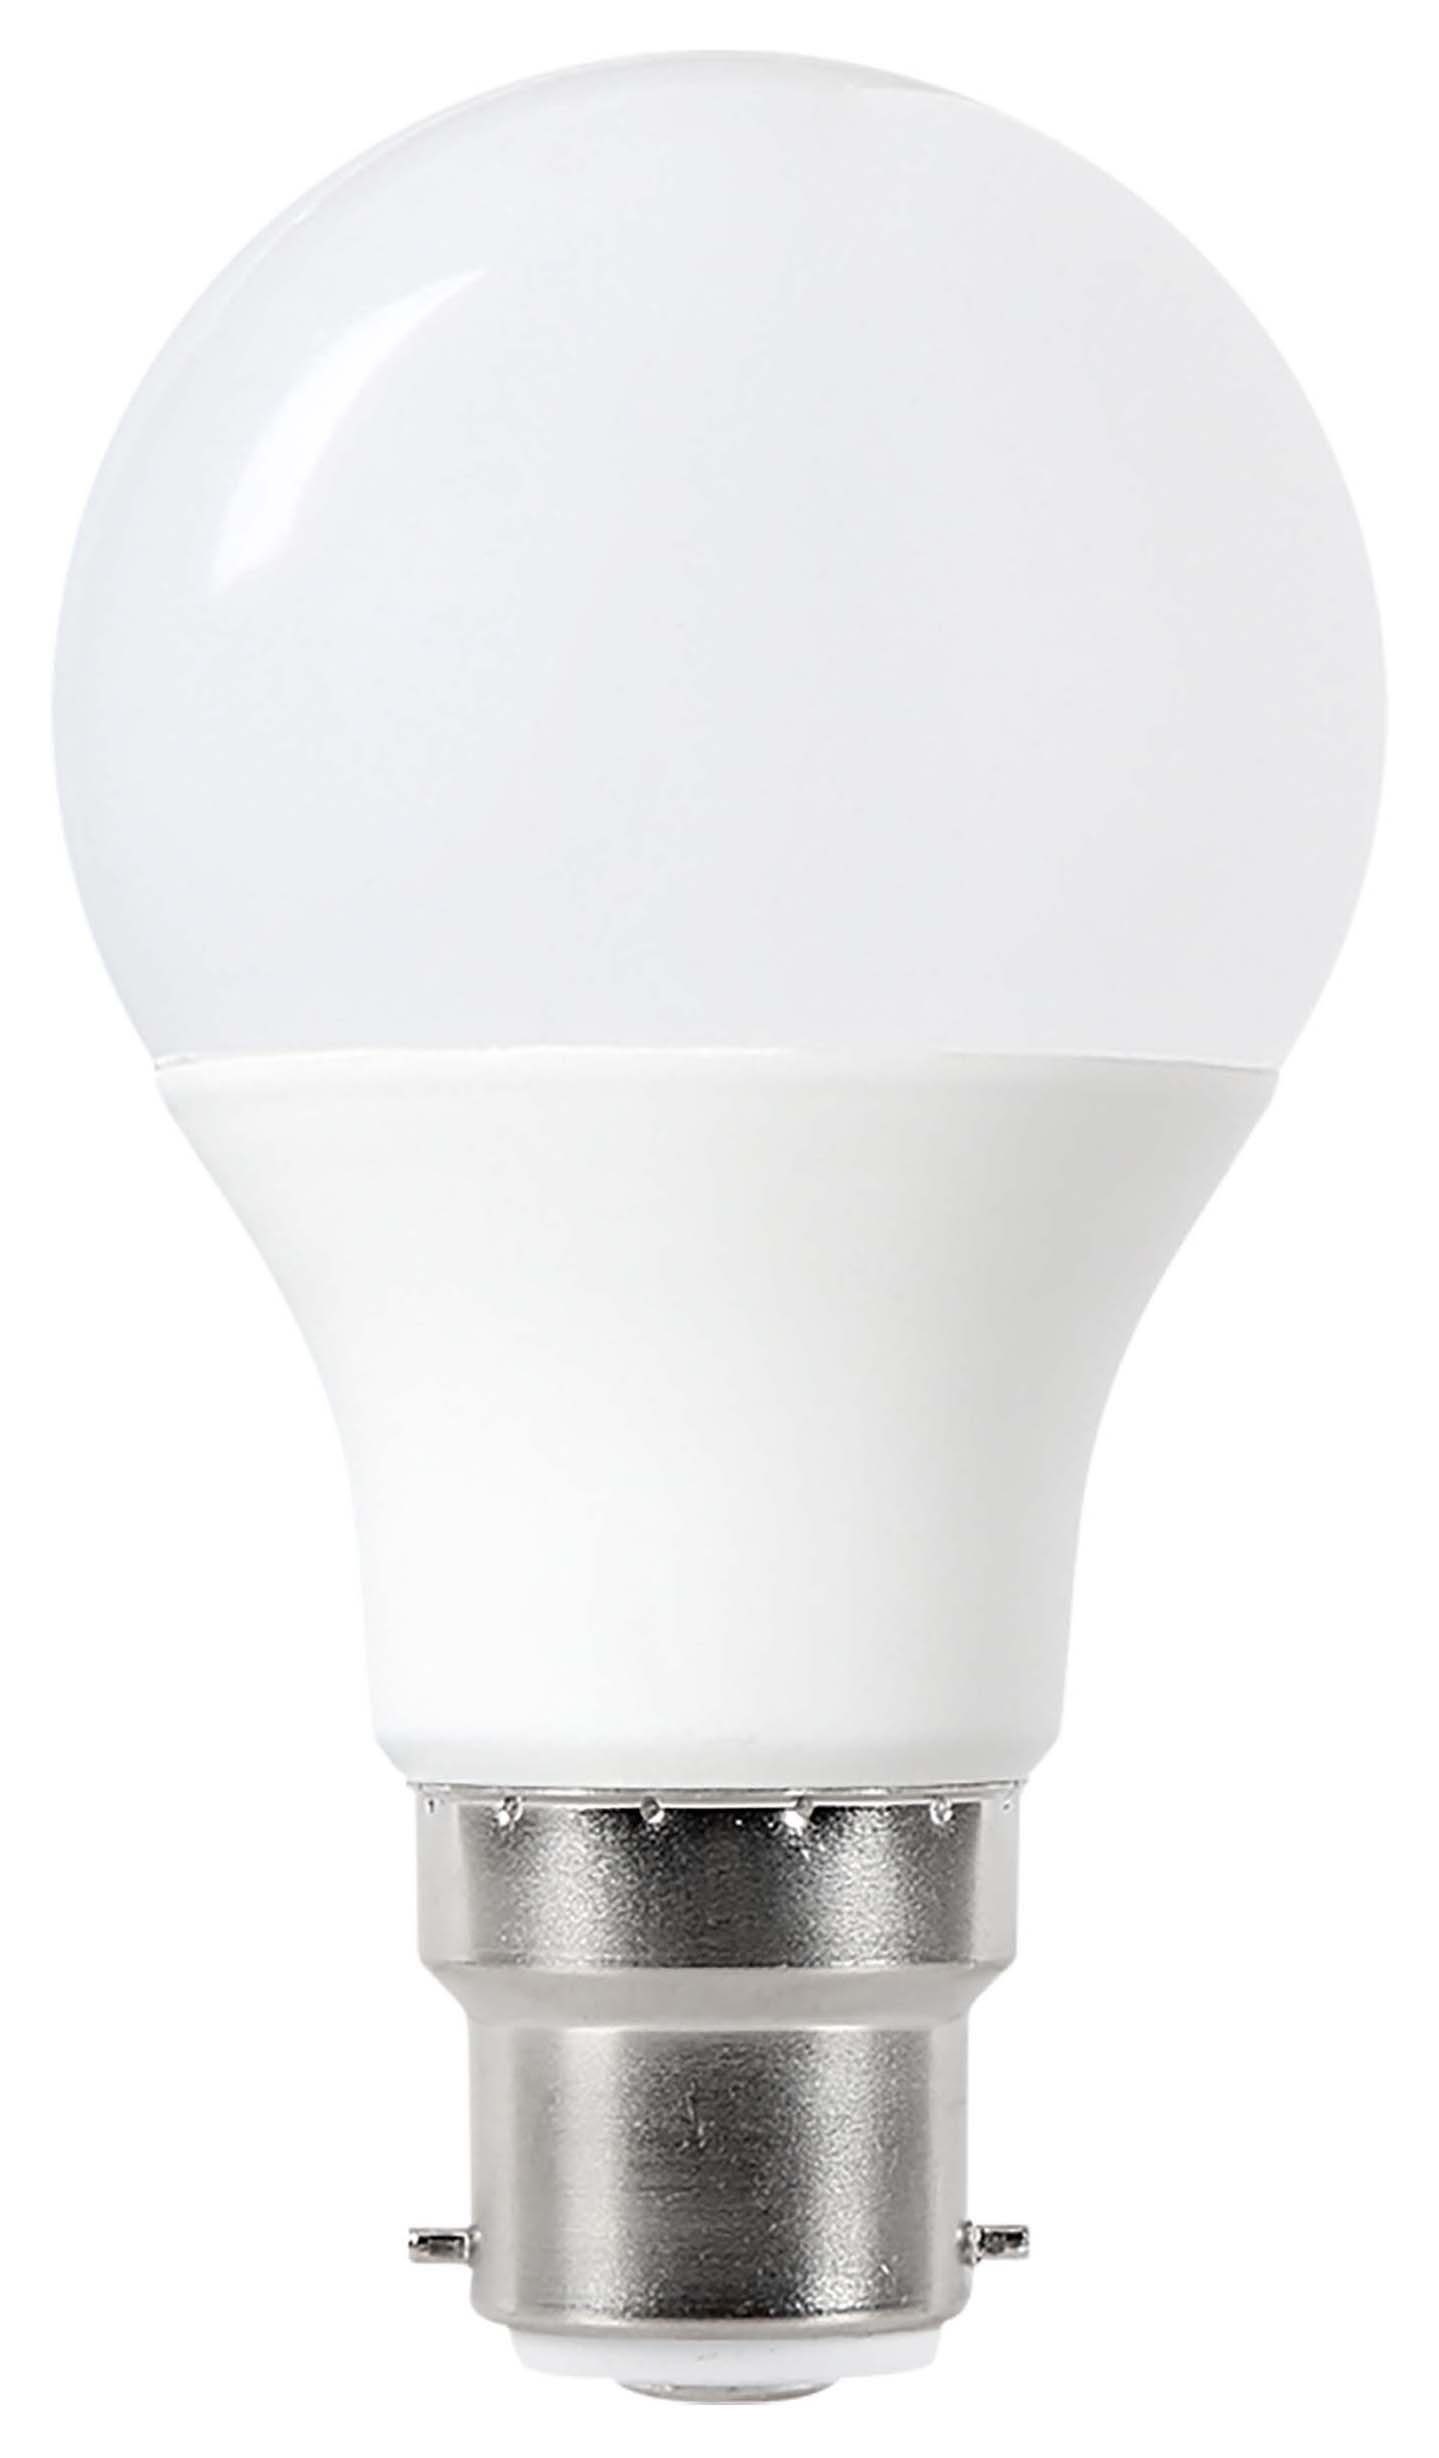 Image of Wickes Non-Dimmable GLS Opal LED B22 8.8W Cool White Light Bulb - Pack of 4